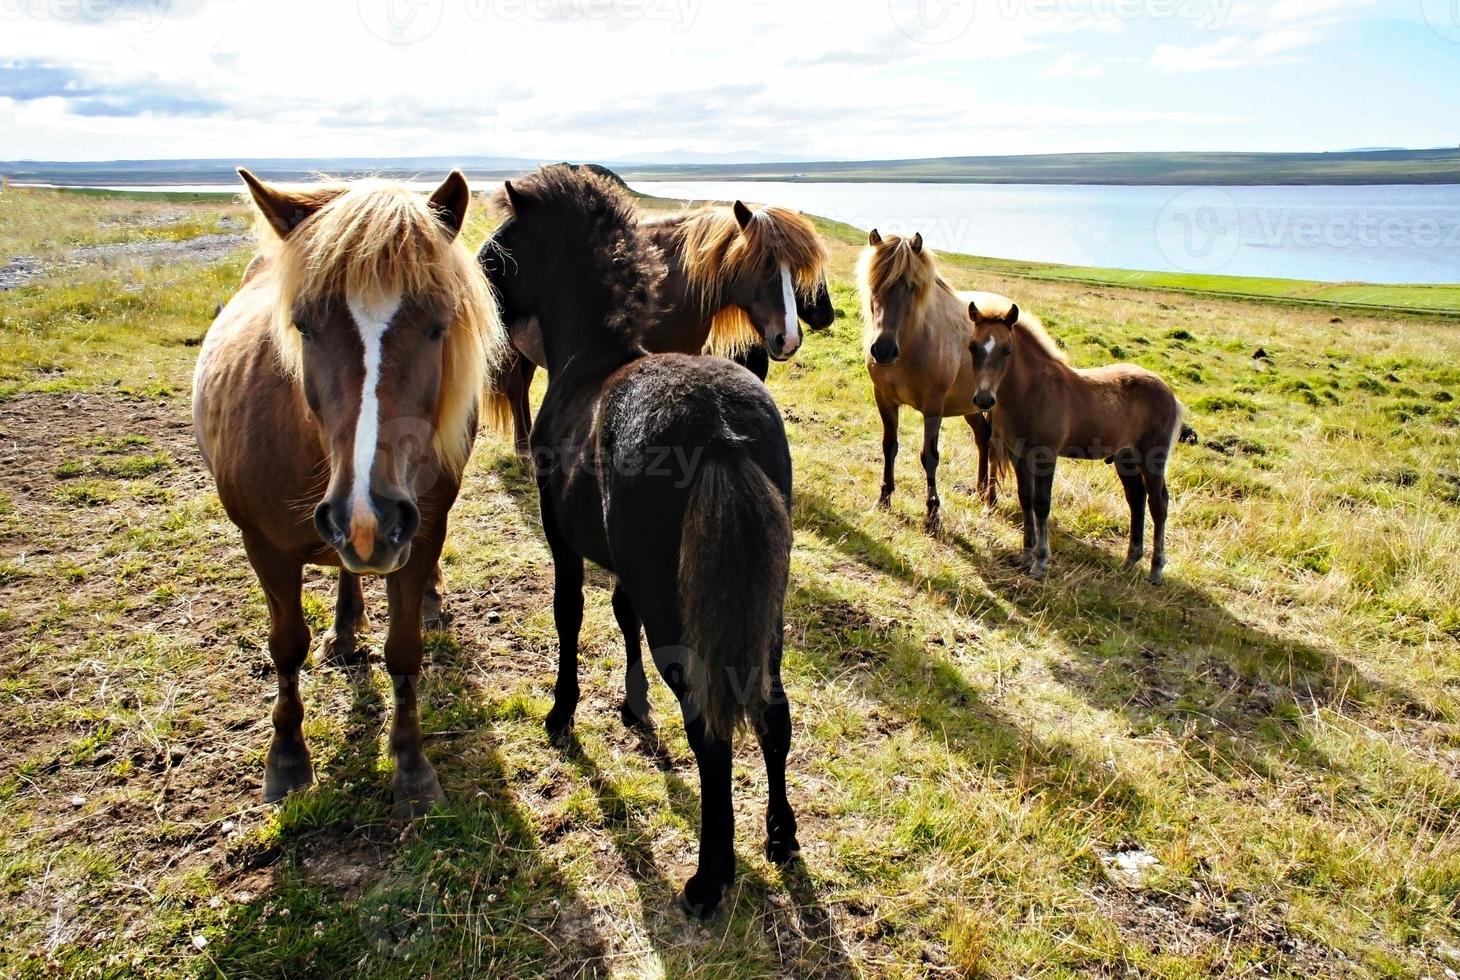 Group of Icelandic horses with foals on green grass, domestic animals, landscape photo